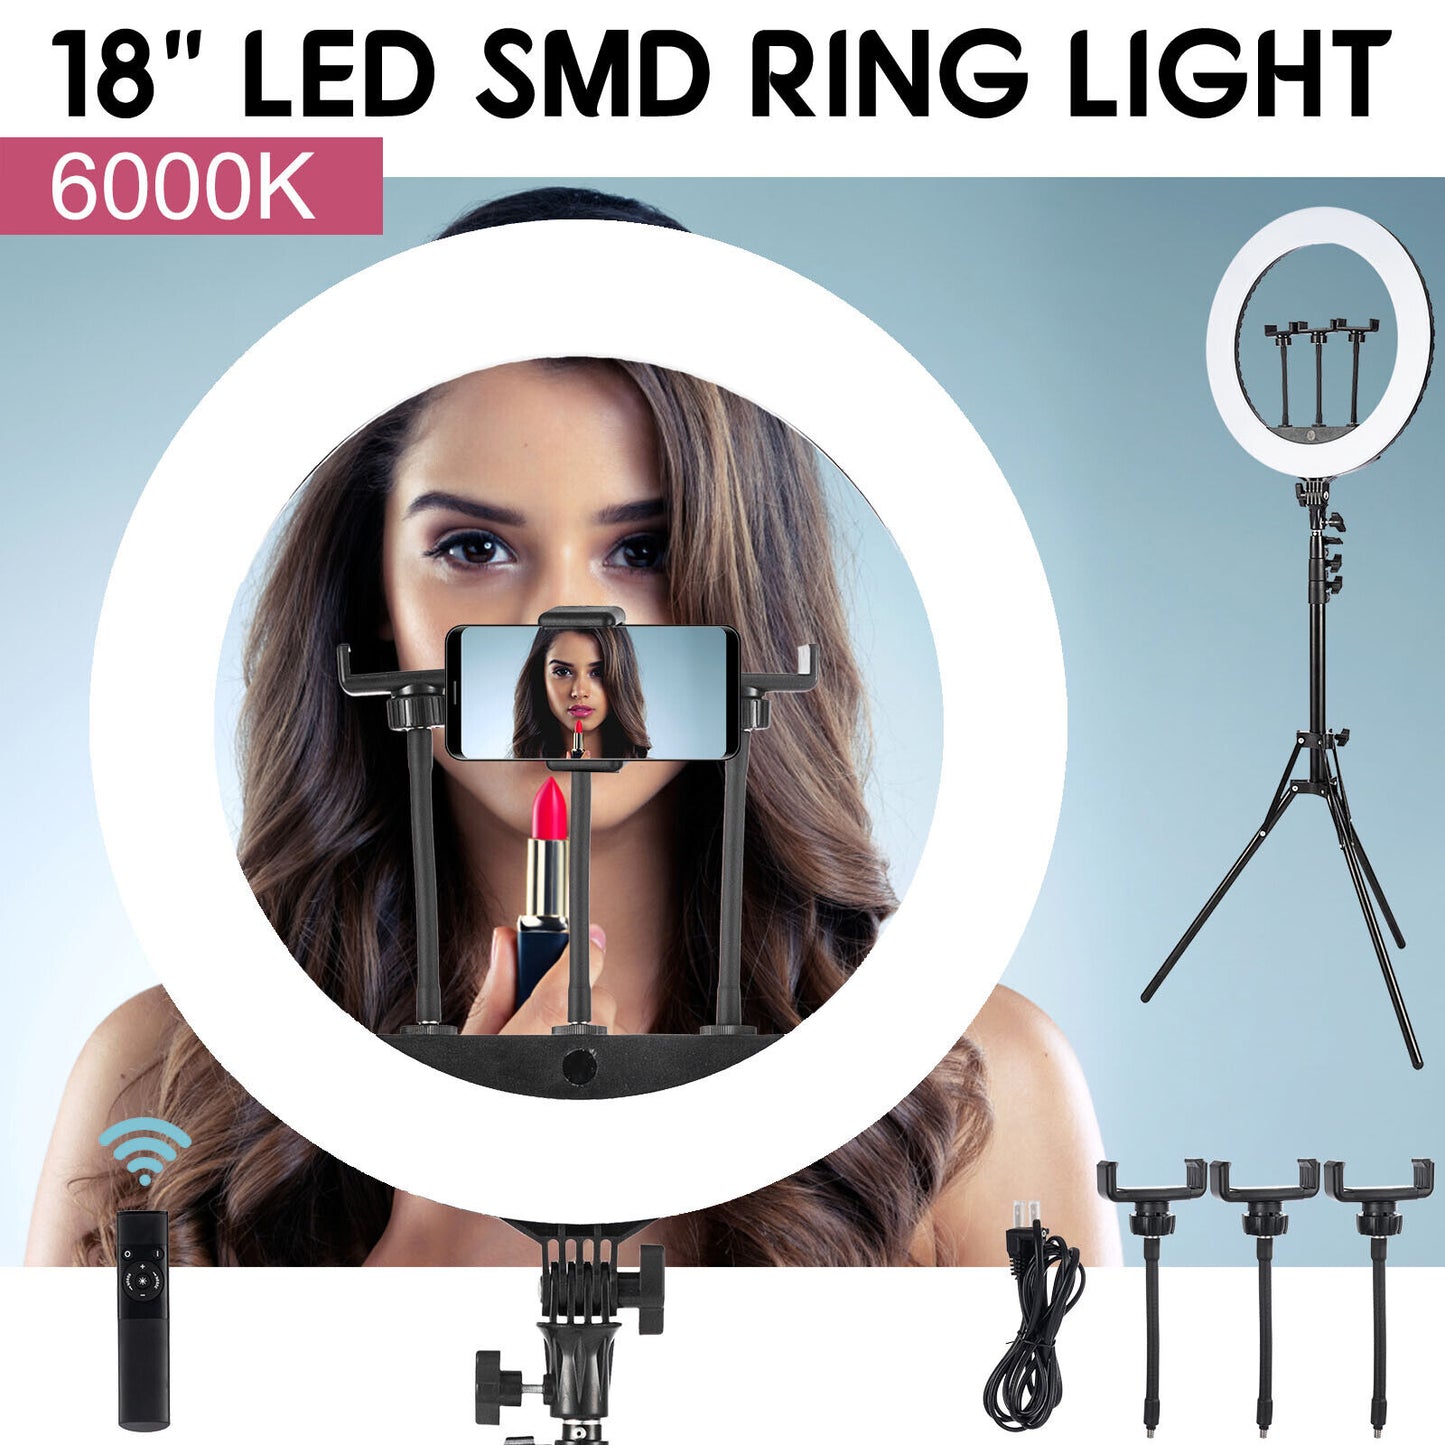 18" LED Ring Light Kit with Stand For Social Media/Beauty Shoot/Photography